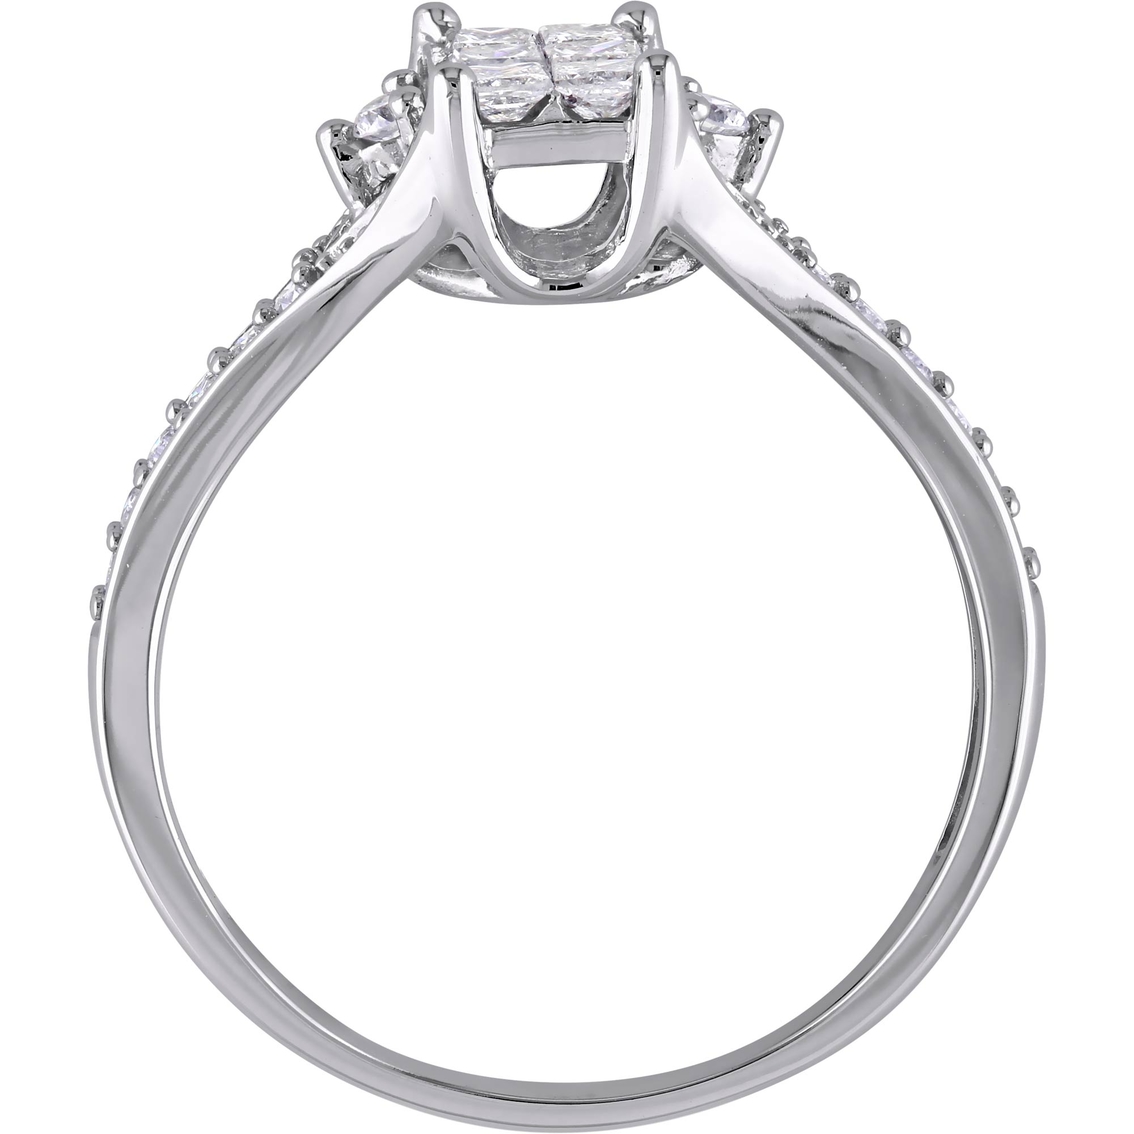 Diamore 10K White Gold 1/2 CTW Diamond Cluster Engagement Ring - Image 3 of 4